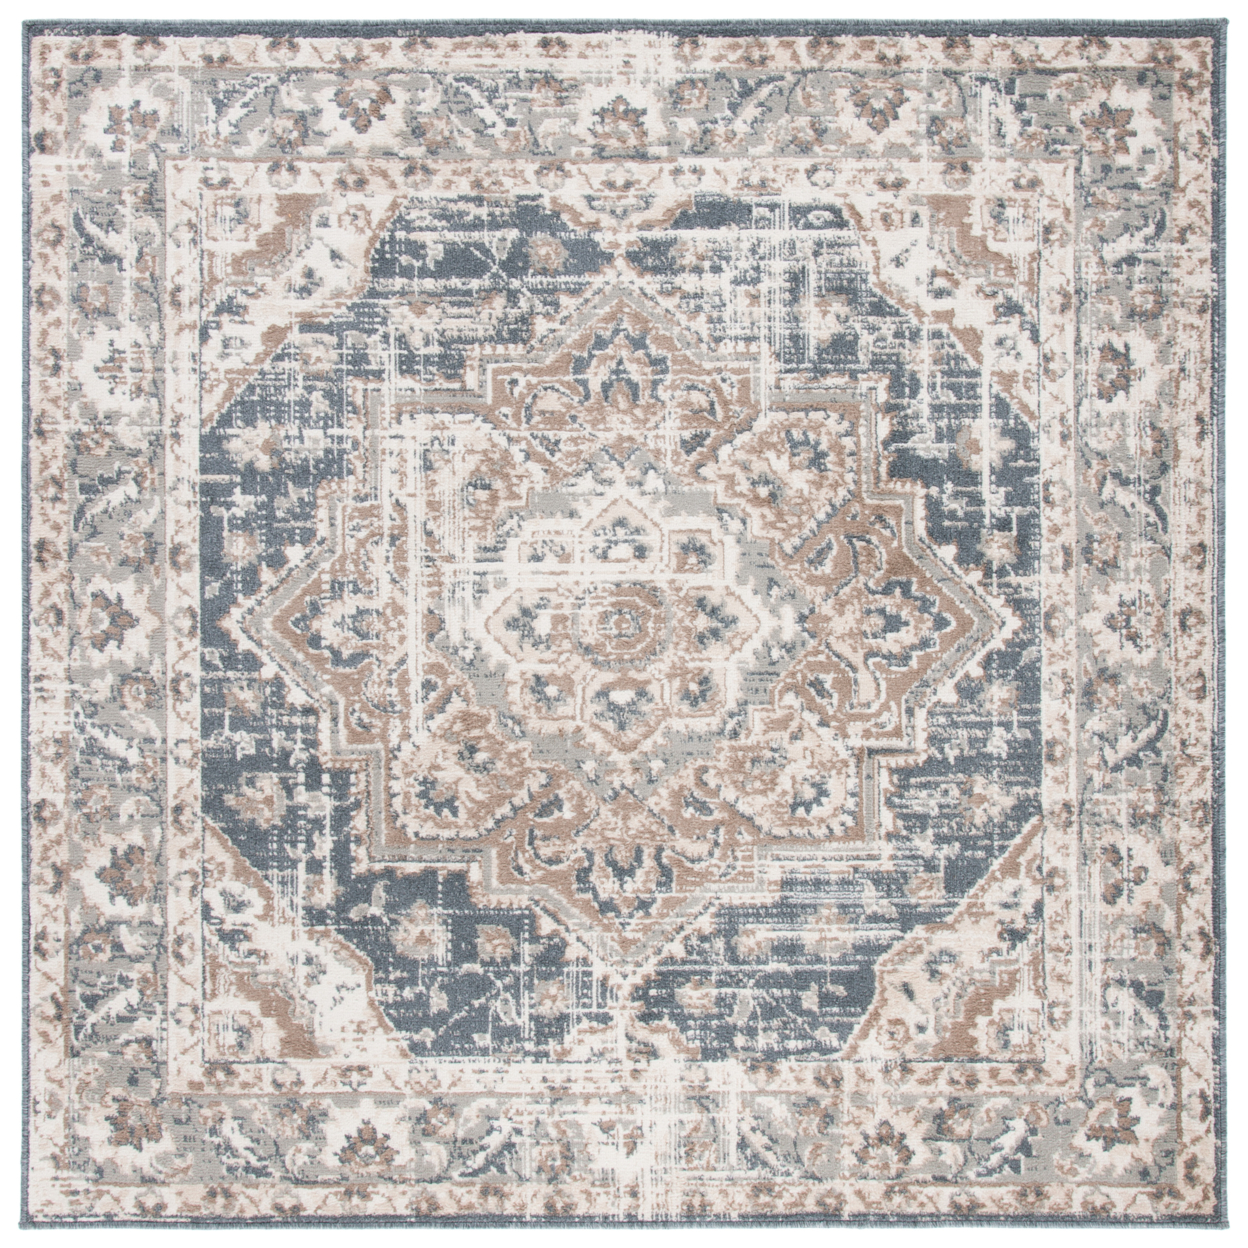 SAFAVIEH Pyramid Collection PYR268B Ivory / Beige Rug - 6-7 X 6-7 Square